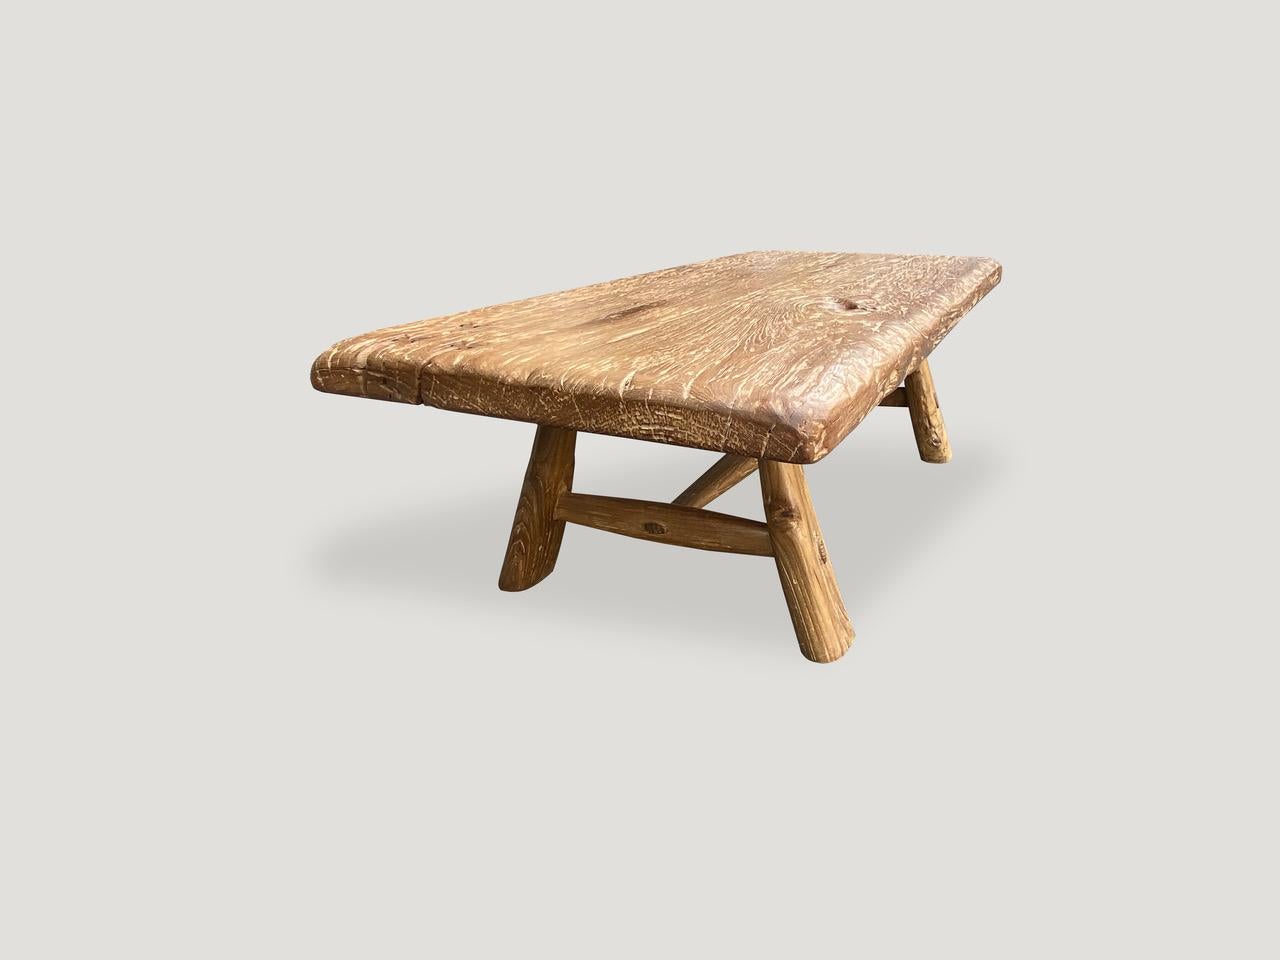 Andrianna Shamaris Midcentury Couture Teak Wood Wabi Sabi Coffee Table In Excellent Condition For Sale In New York, NY